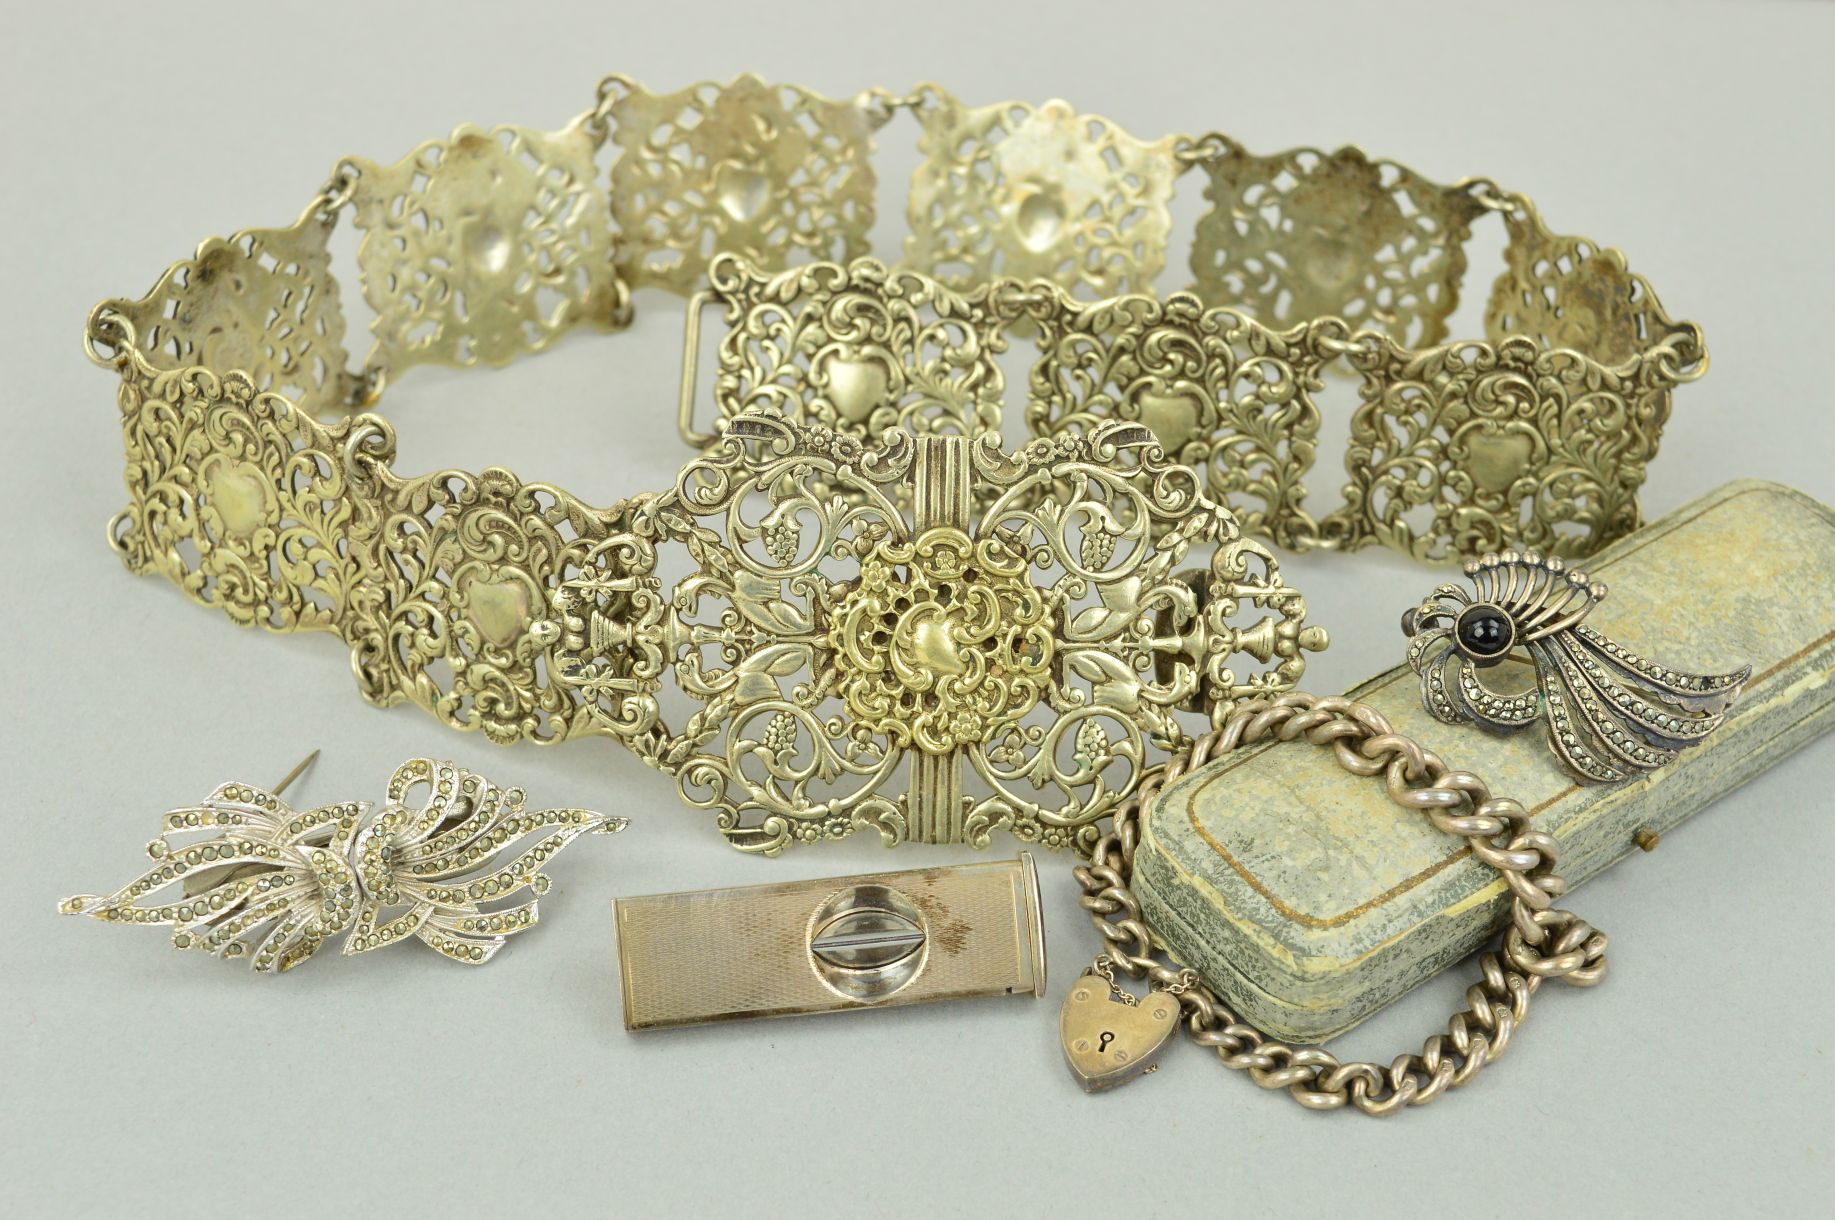 AN EARLY 20TH CENTURY EPNS BELT, A CIGAR CUTTER AND THREE ITEMS OF JEWELLERY, the belt of pierced